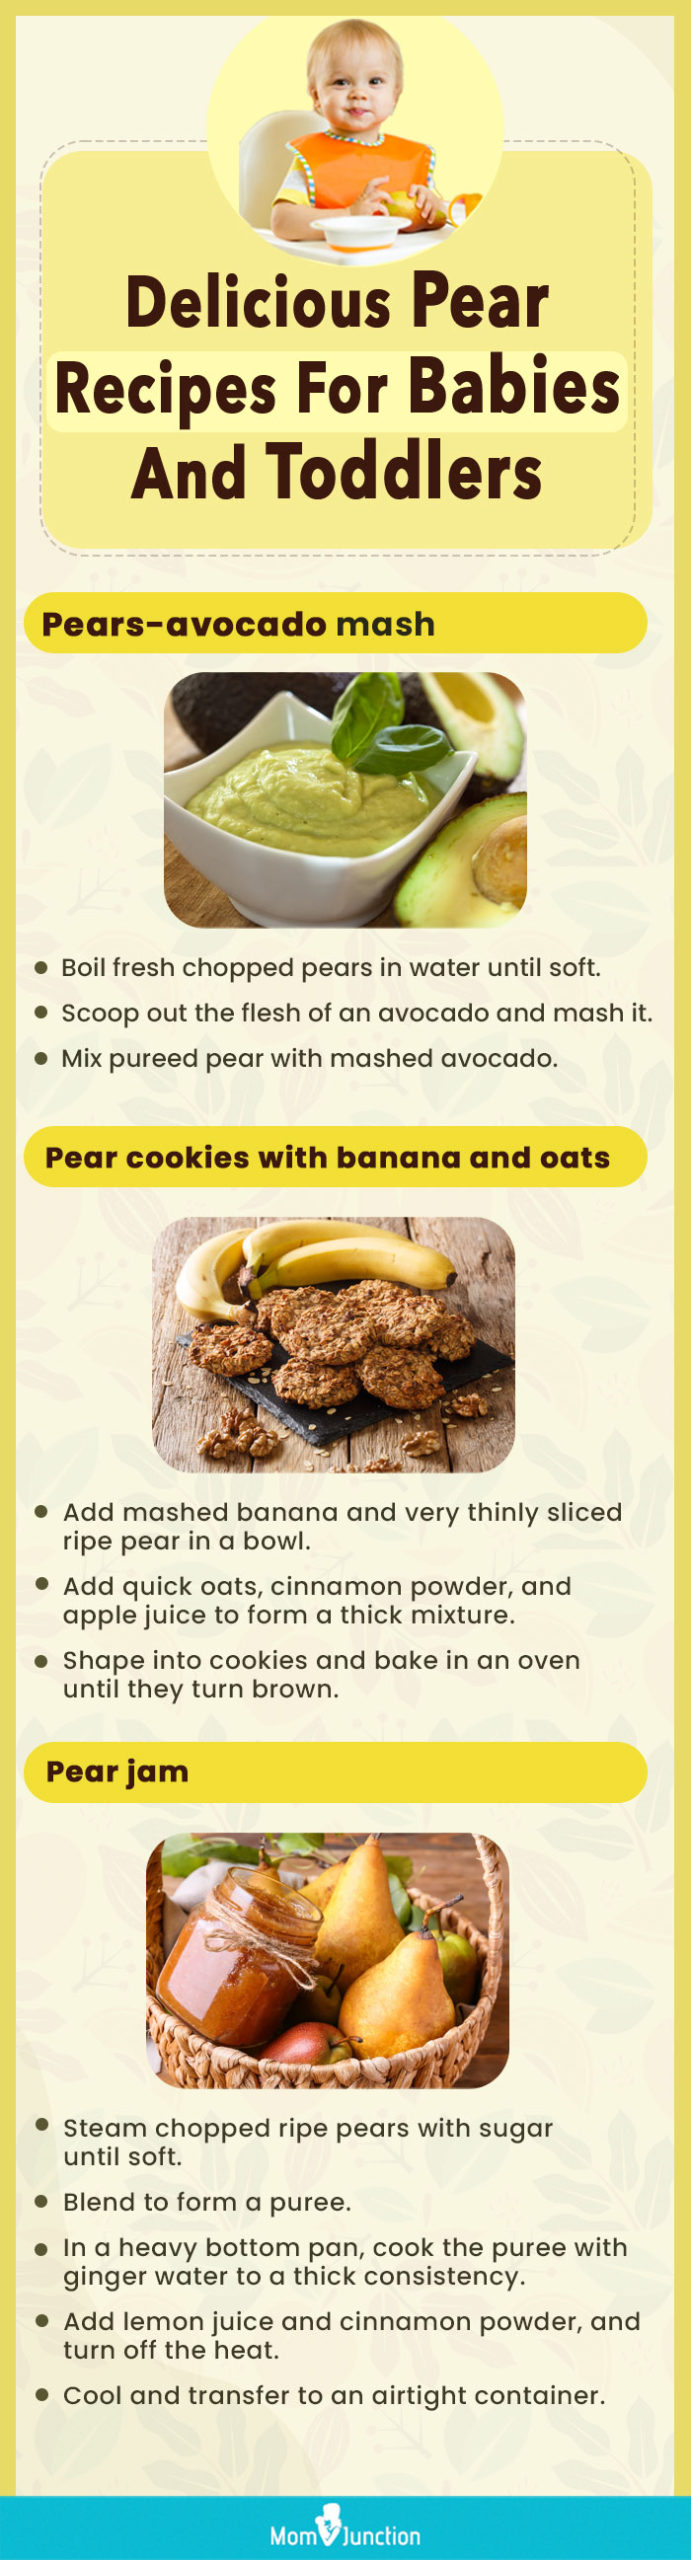 delicious pear recipes for babies and toddlers (infographic)